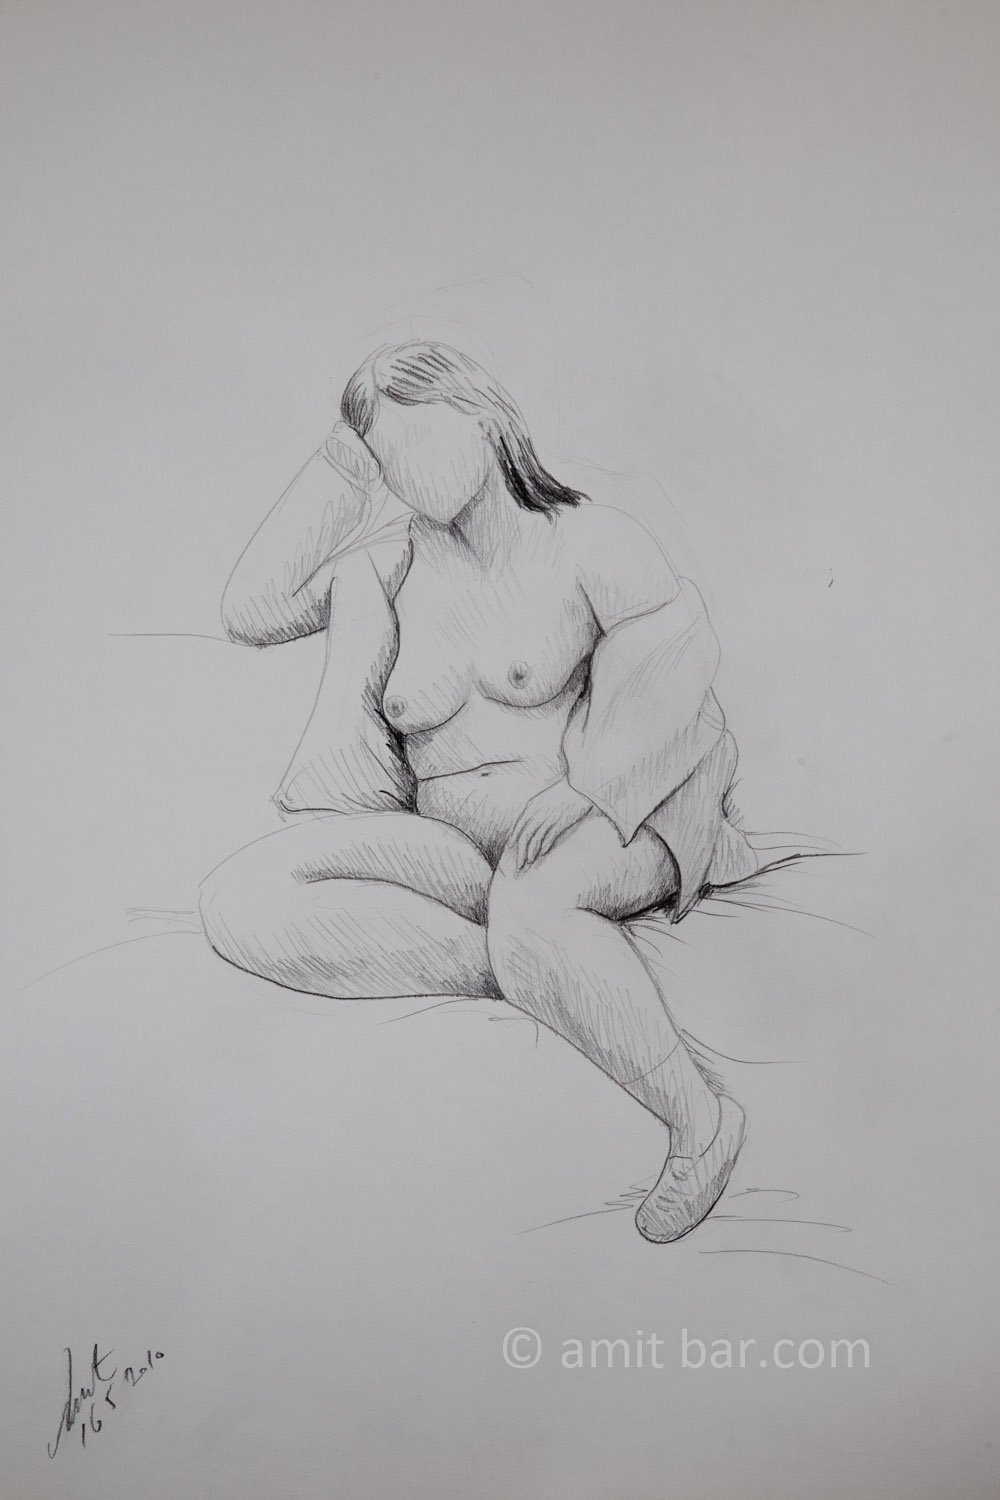 A model with shirt and shoes. Pencil